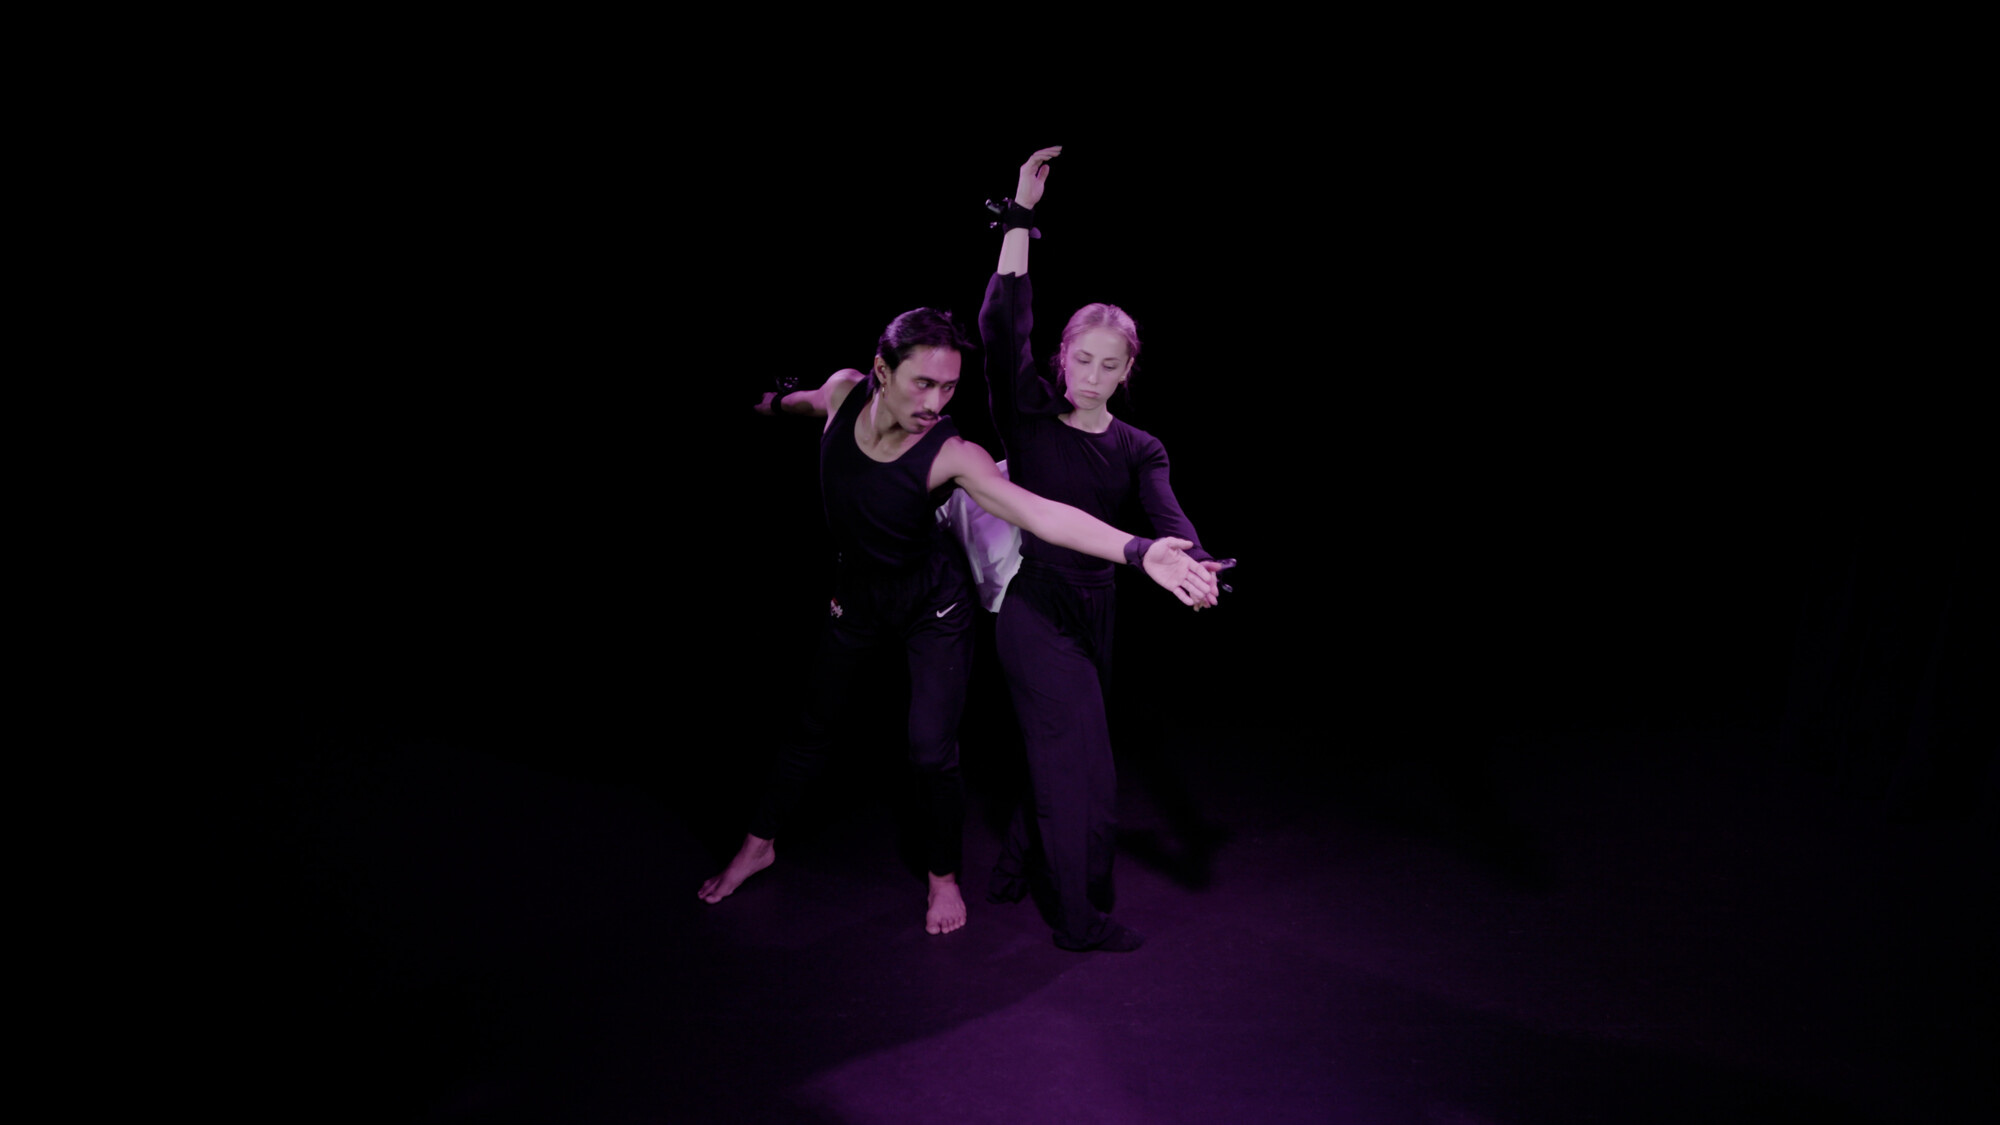 Two actors in wearing black perform in front of a black backround.